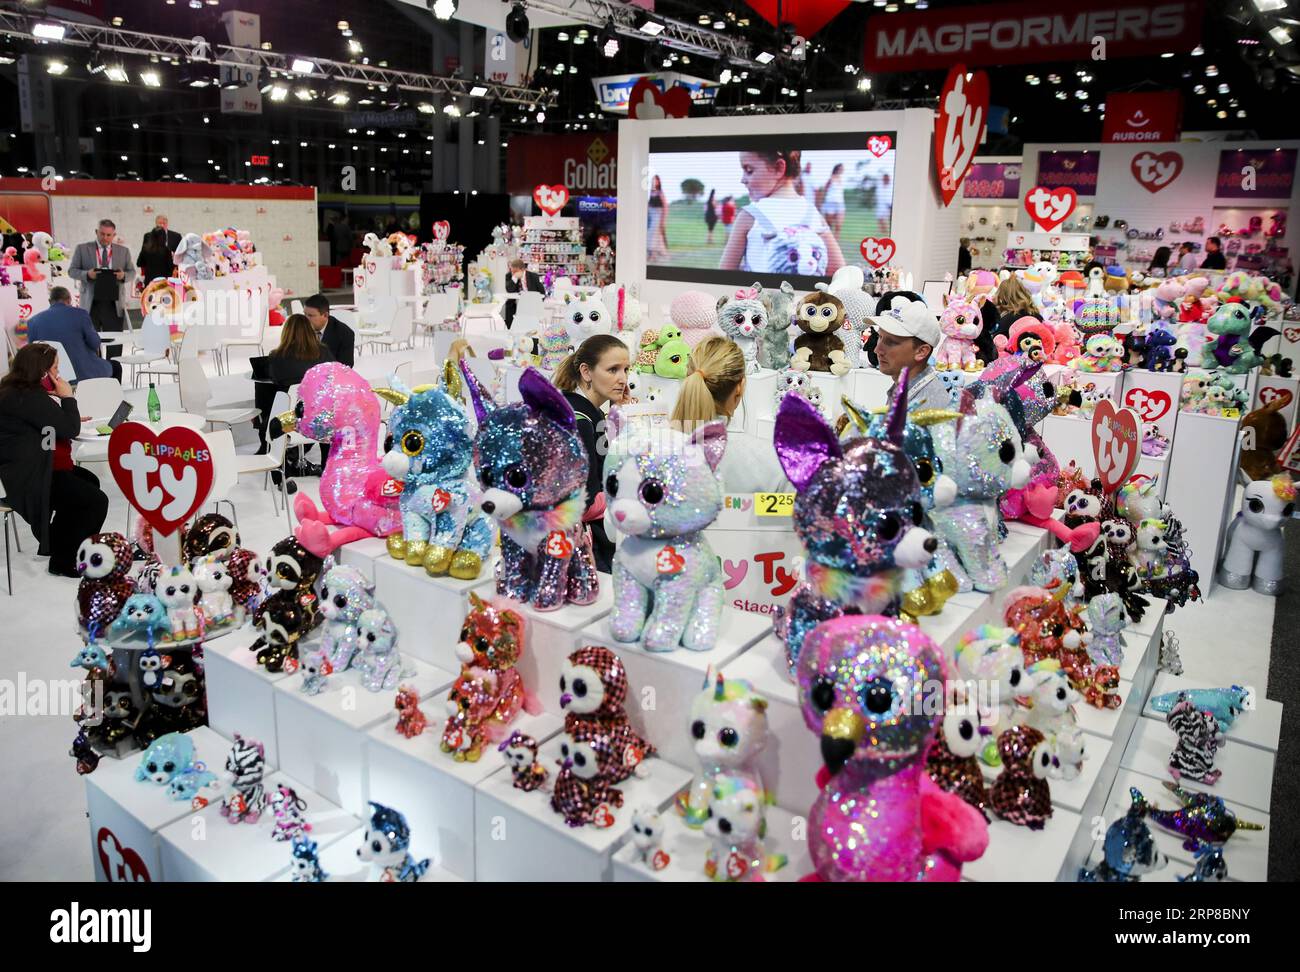 (190226) -- BEIJING, Feb. 26, 2019 -- Visitors look at stuffed toys at the booth of Ty Inc. during the 116th Annual North American International Toy Fair at the Jacob K. Javits Convention Center in New York, the United States, on Feb. 19, 2019. ) Xinhua headlines: More fun toys, no painful tariffs: American toymakers hopeful on U.S.-China trade deal WangxYing PUBLICATIONxNOTxINxCHN Stock Photo